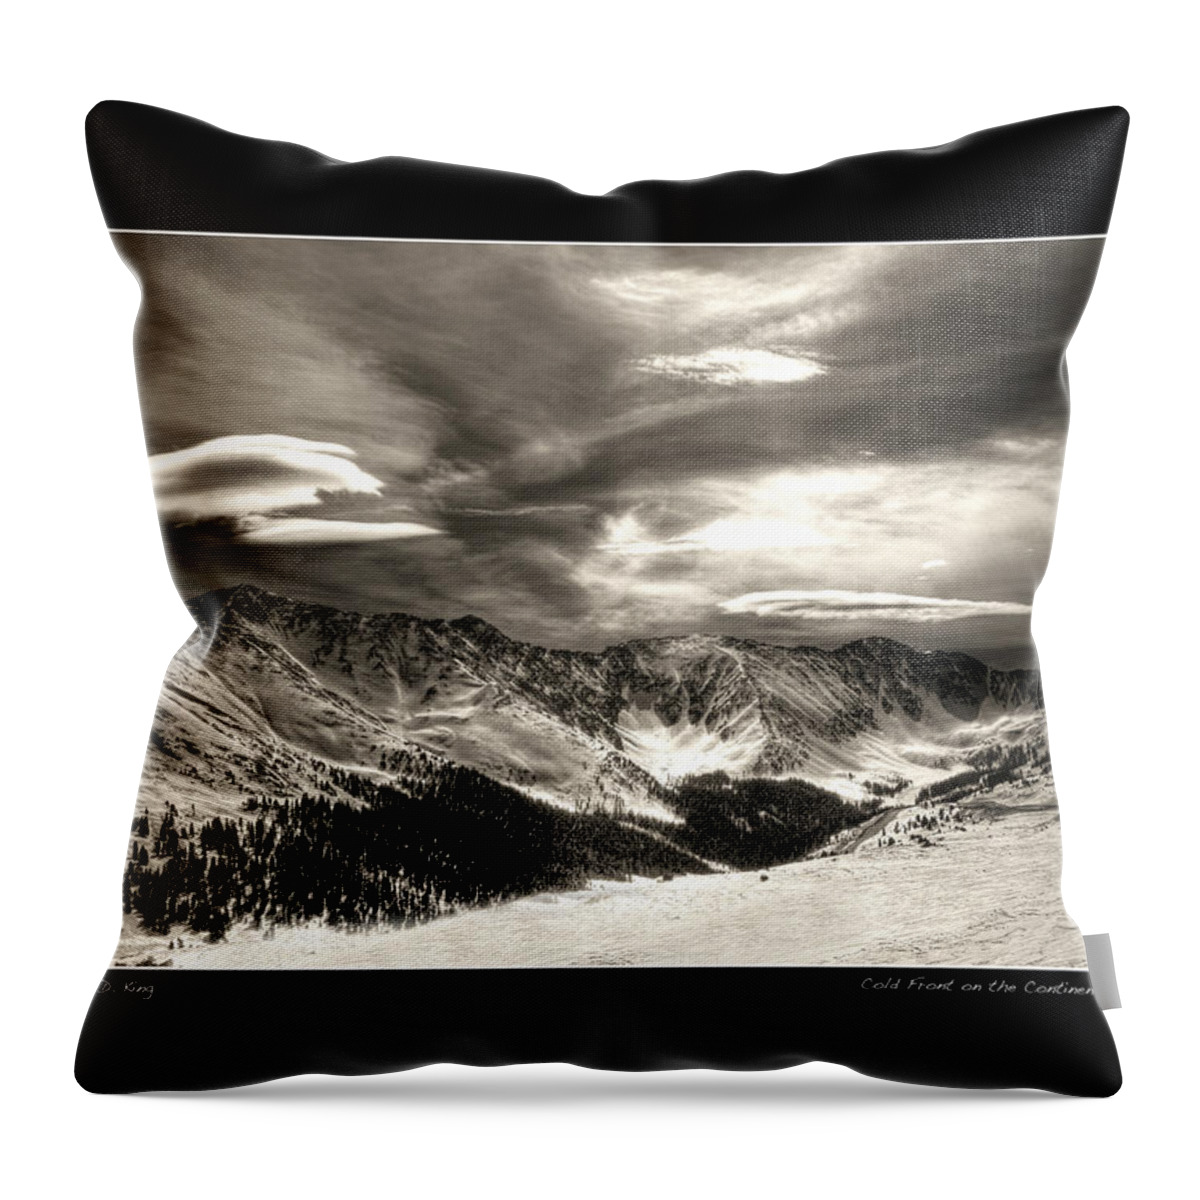  Throw Pillow featuring the photograph Cold Front over The Continental Divide Poster by Wayne King